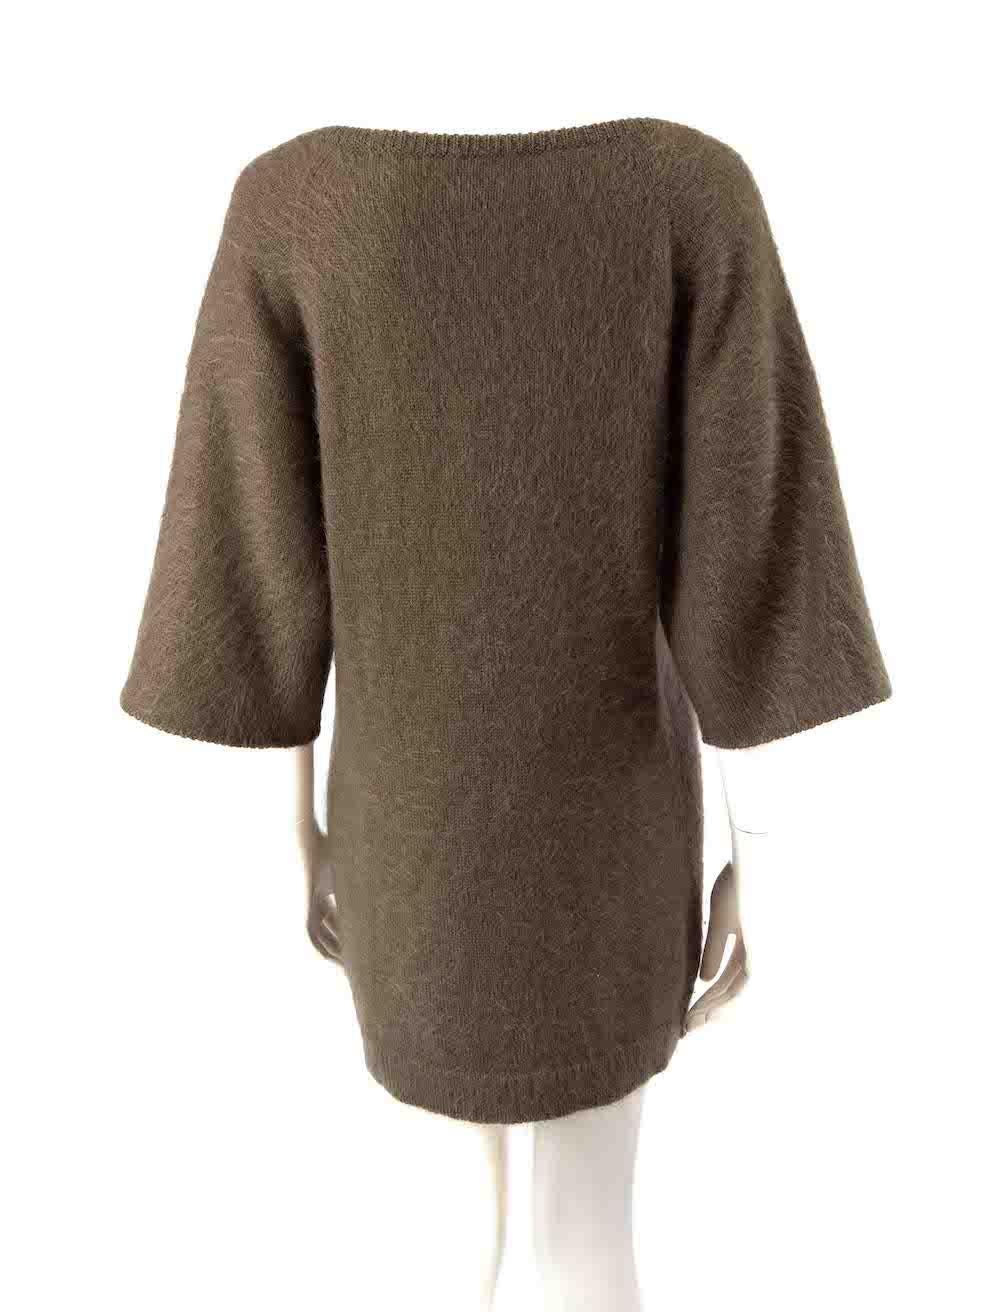 Hermès Khaki Wool Short Sleeves Knit Jumper Dress Size L In Excellent Condition For Sale In London, GB